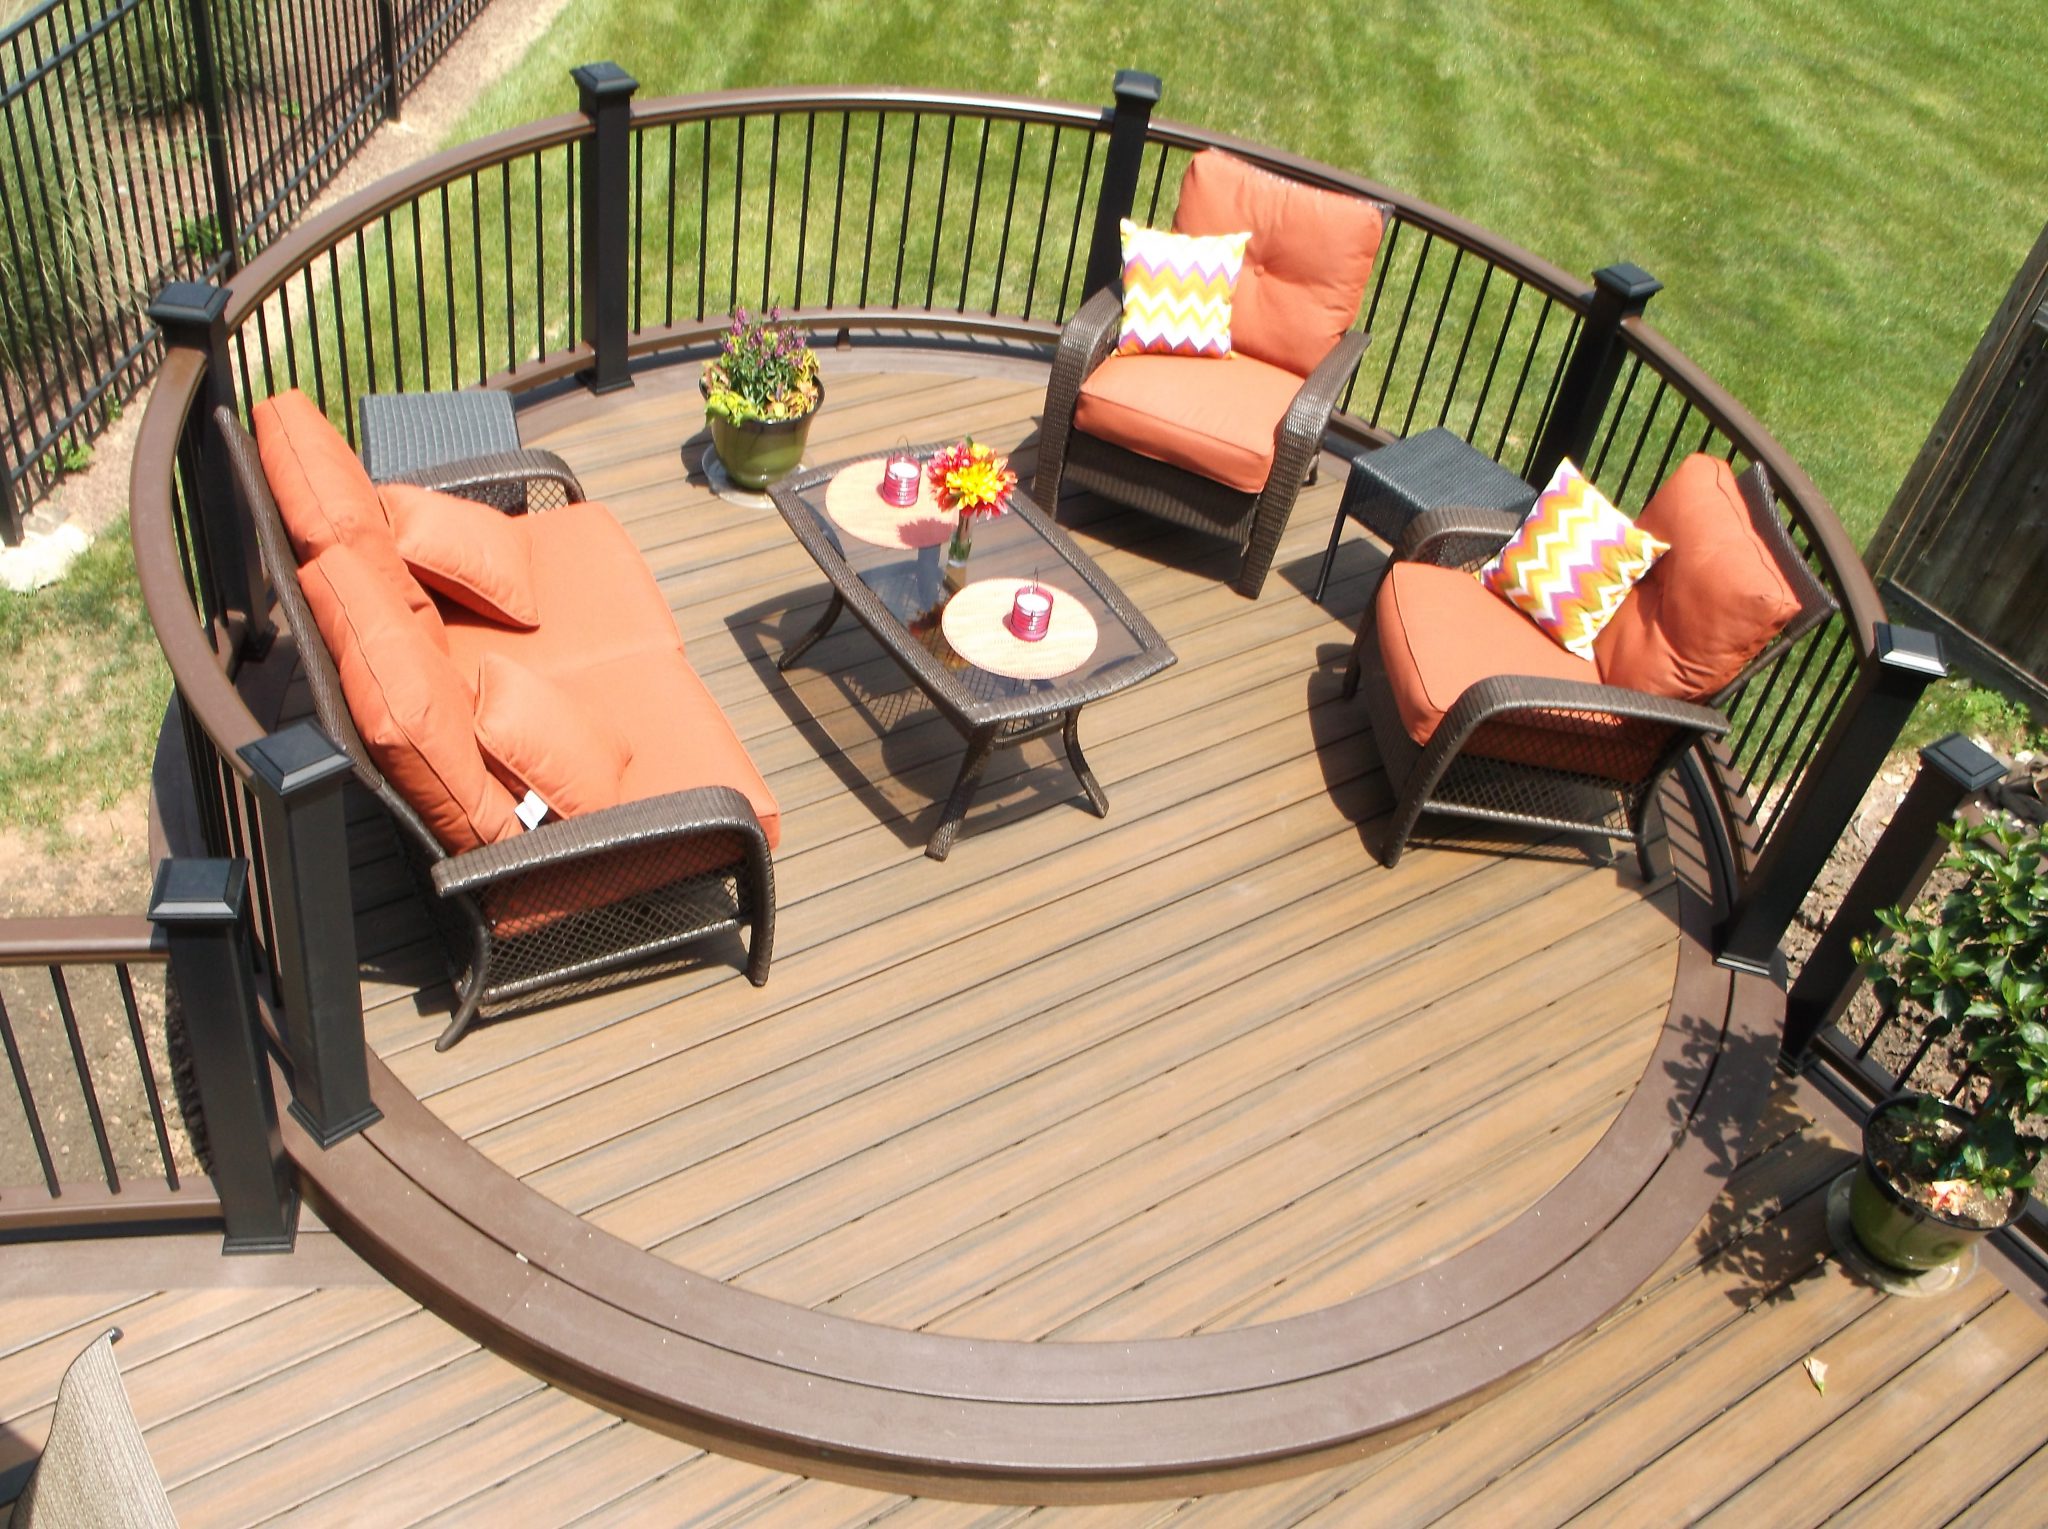 Deck Patterns for Curved Deck Designs- Amazing Deck